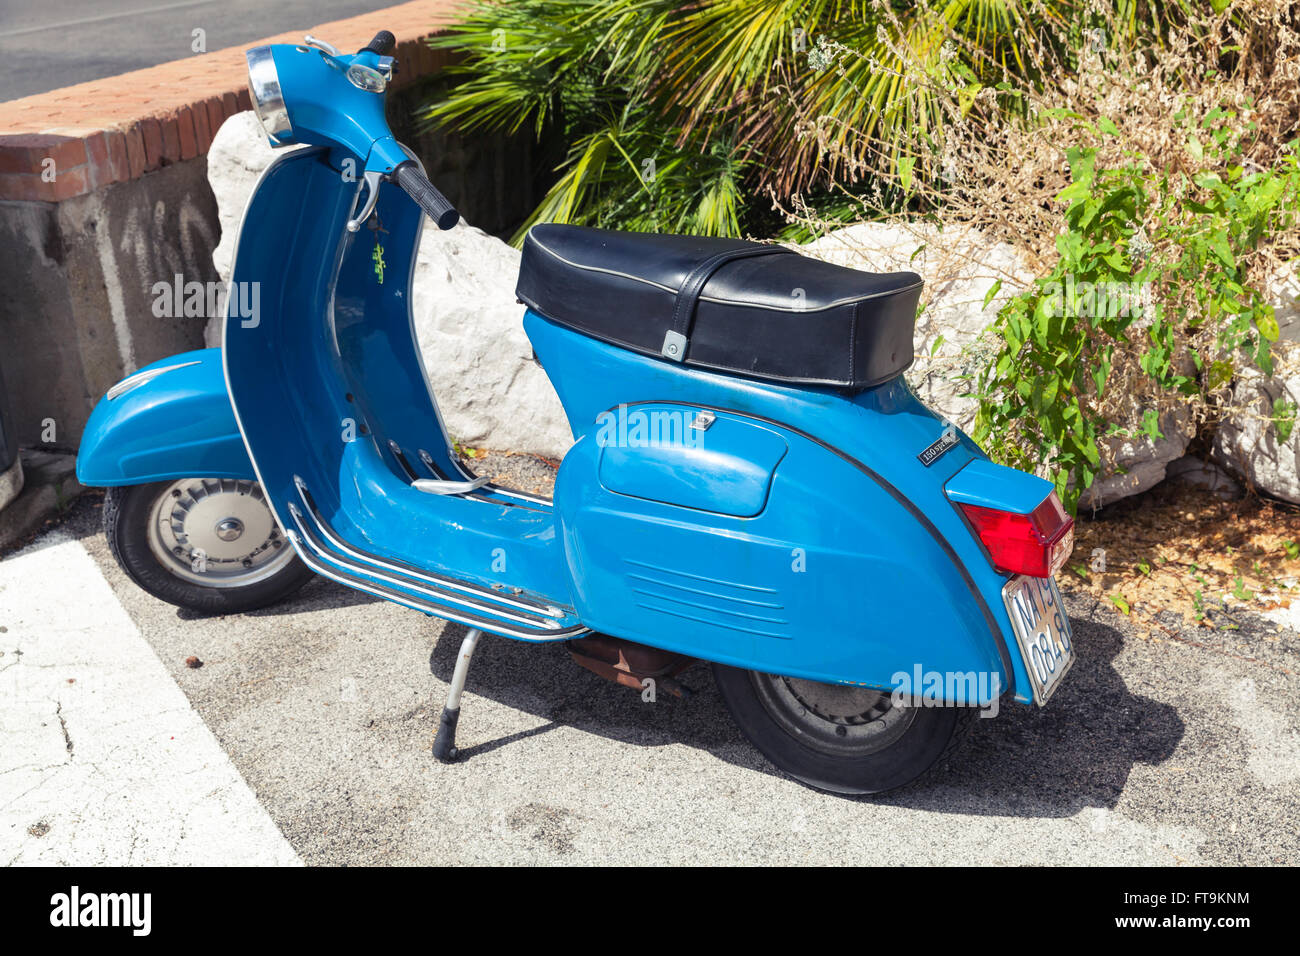 Lacco Ameno, Italy - August 11, 2015: Classic blue Vespa Sprint 150 scooter stands parked in a town Stock Photo